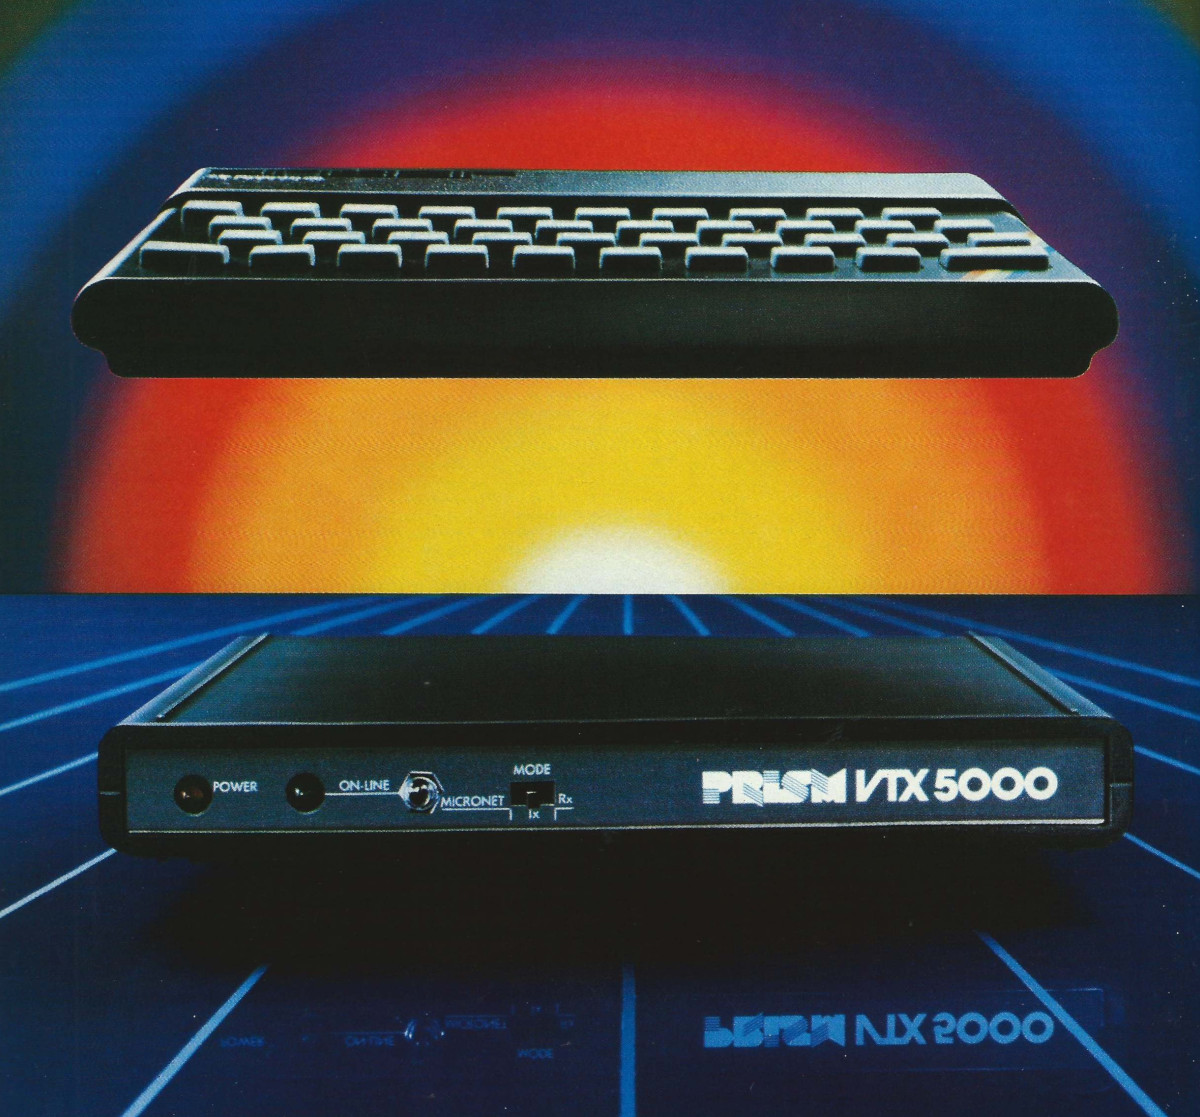 Prism's VTX 5000 Prestel/Micronet adapter, from Personal Computer News, 1st September 1983